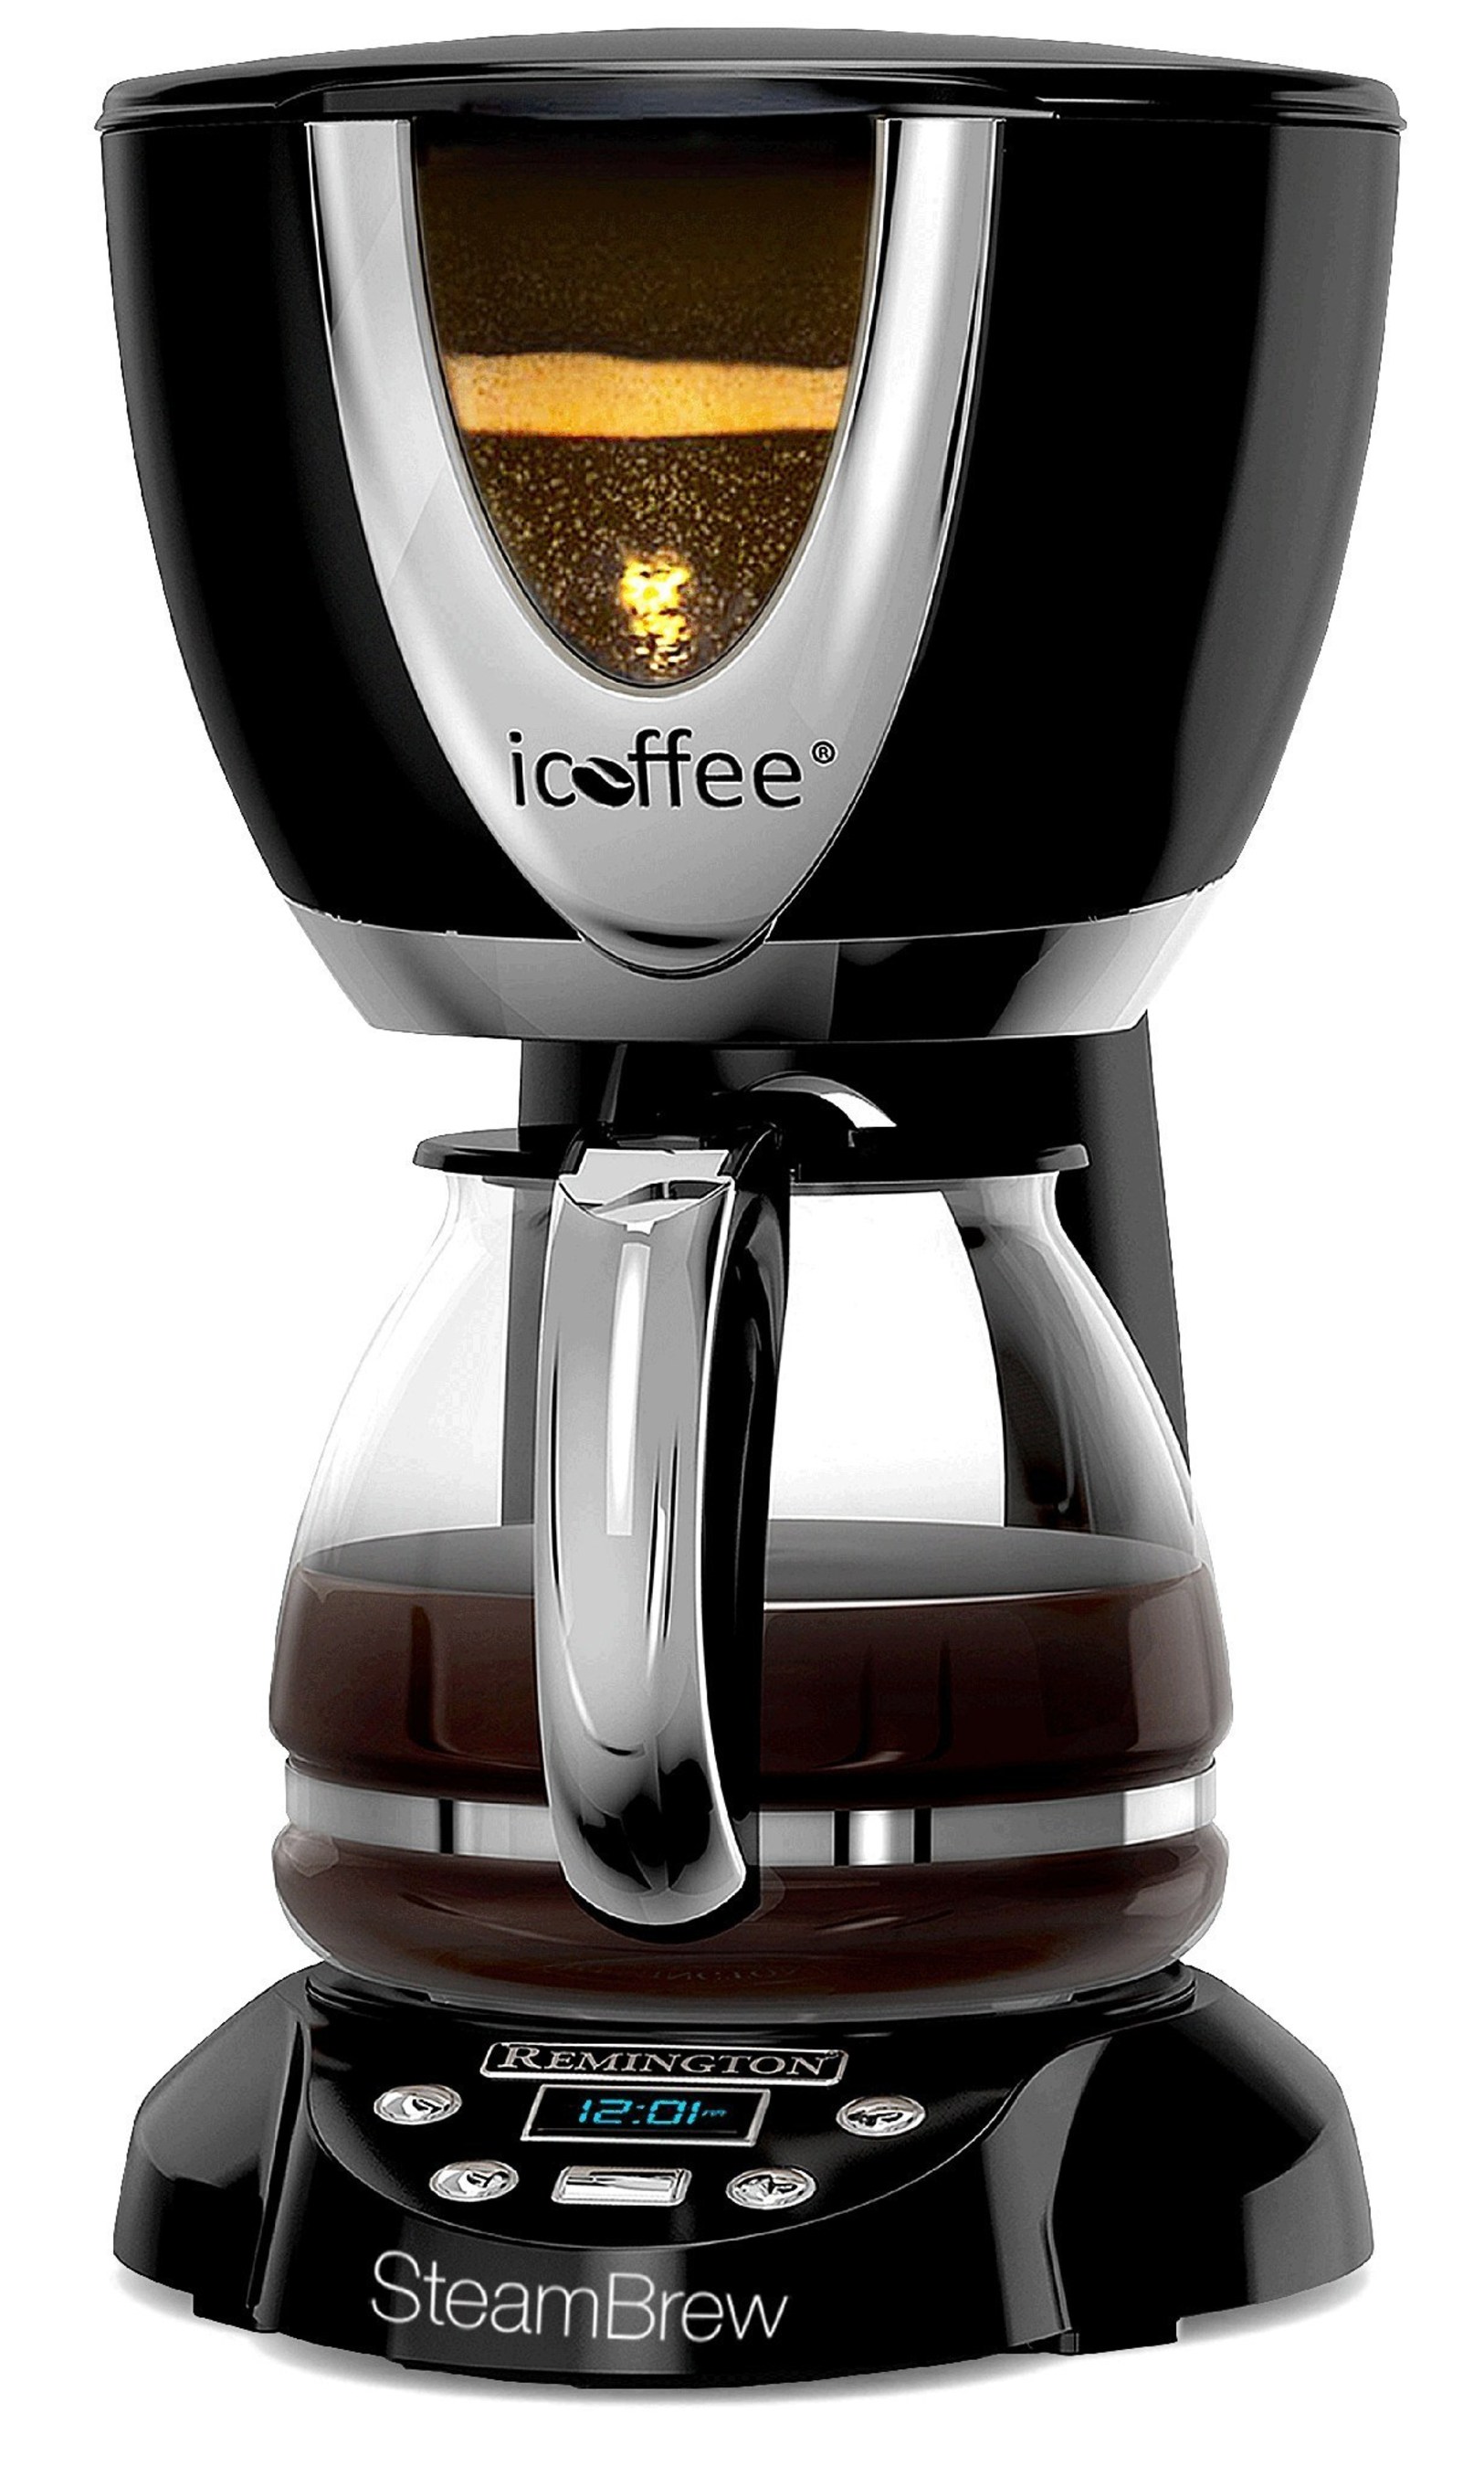 This award-winning coffee maker is on sale